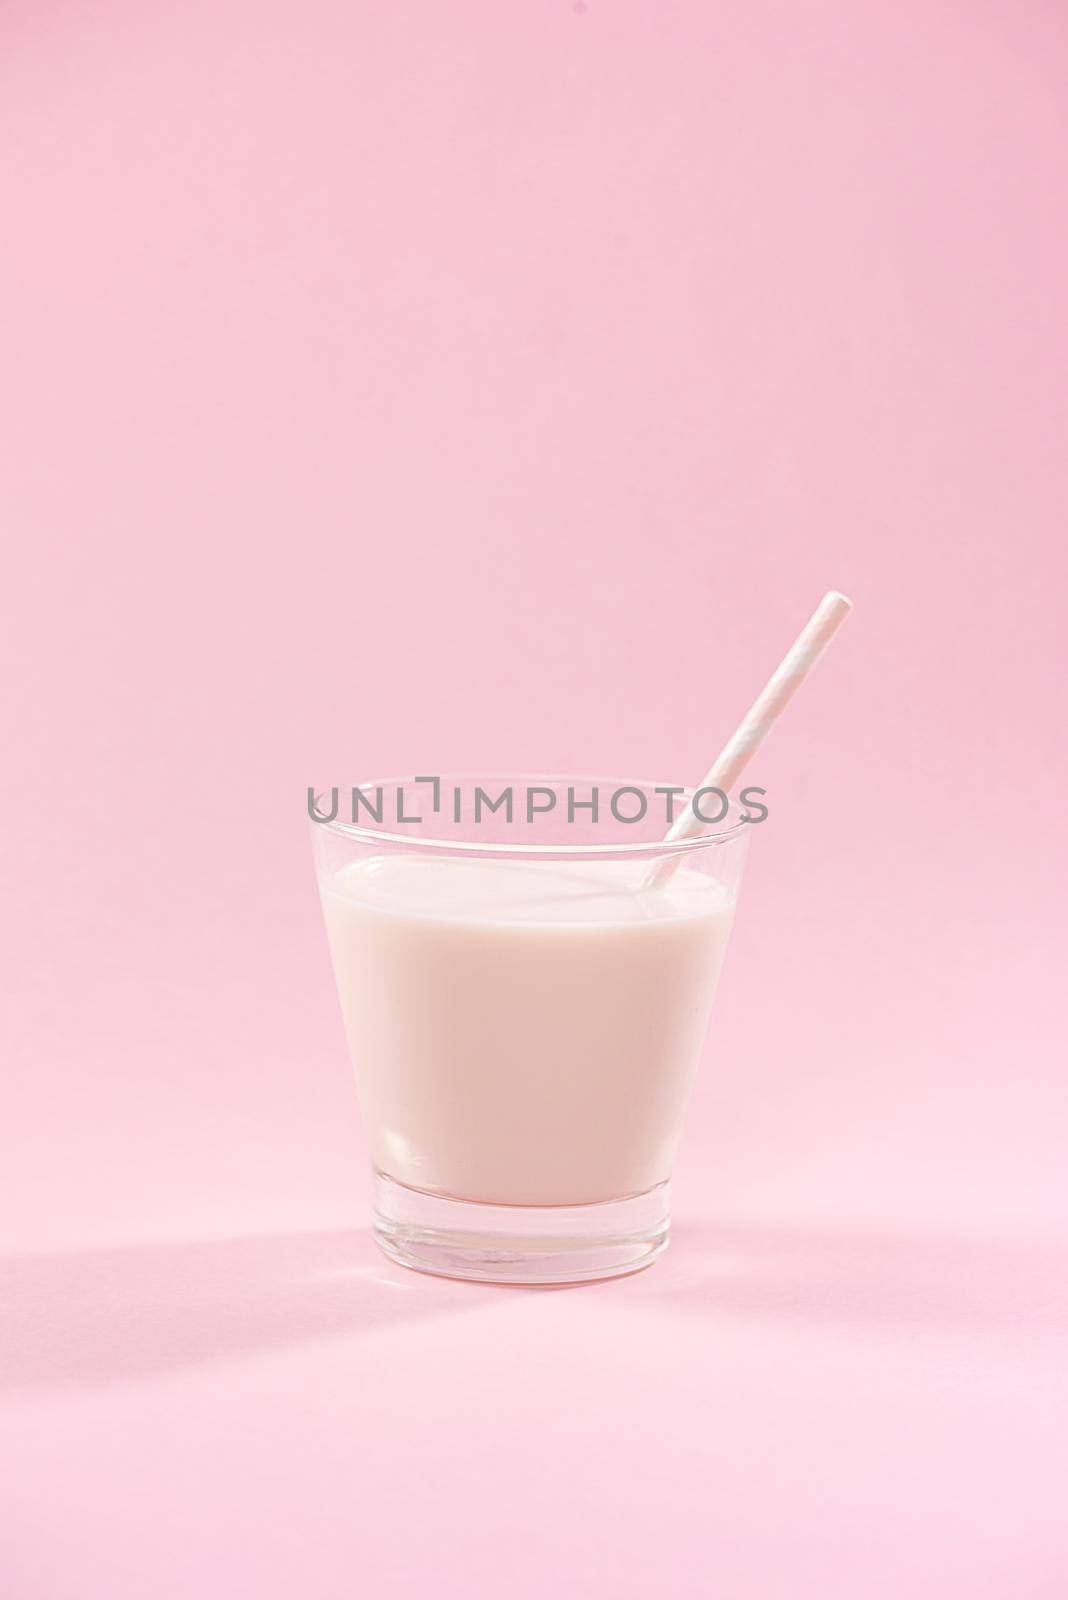 Dairy products. A glass of milk on a pink background. by makidotvn